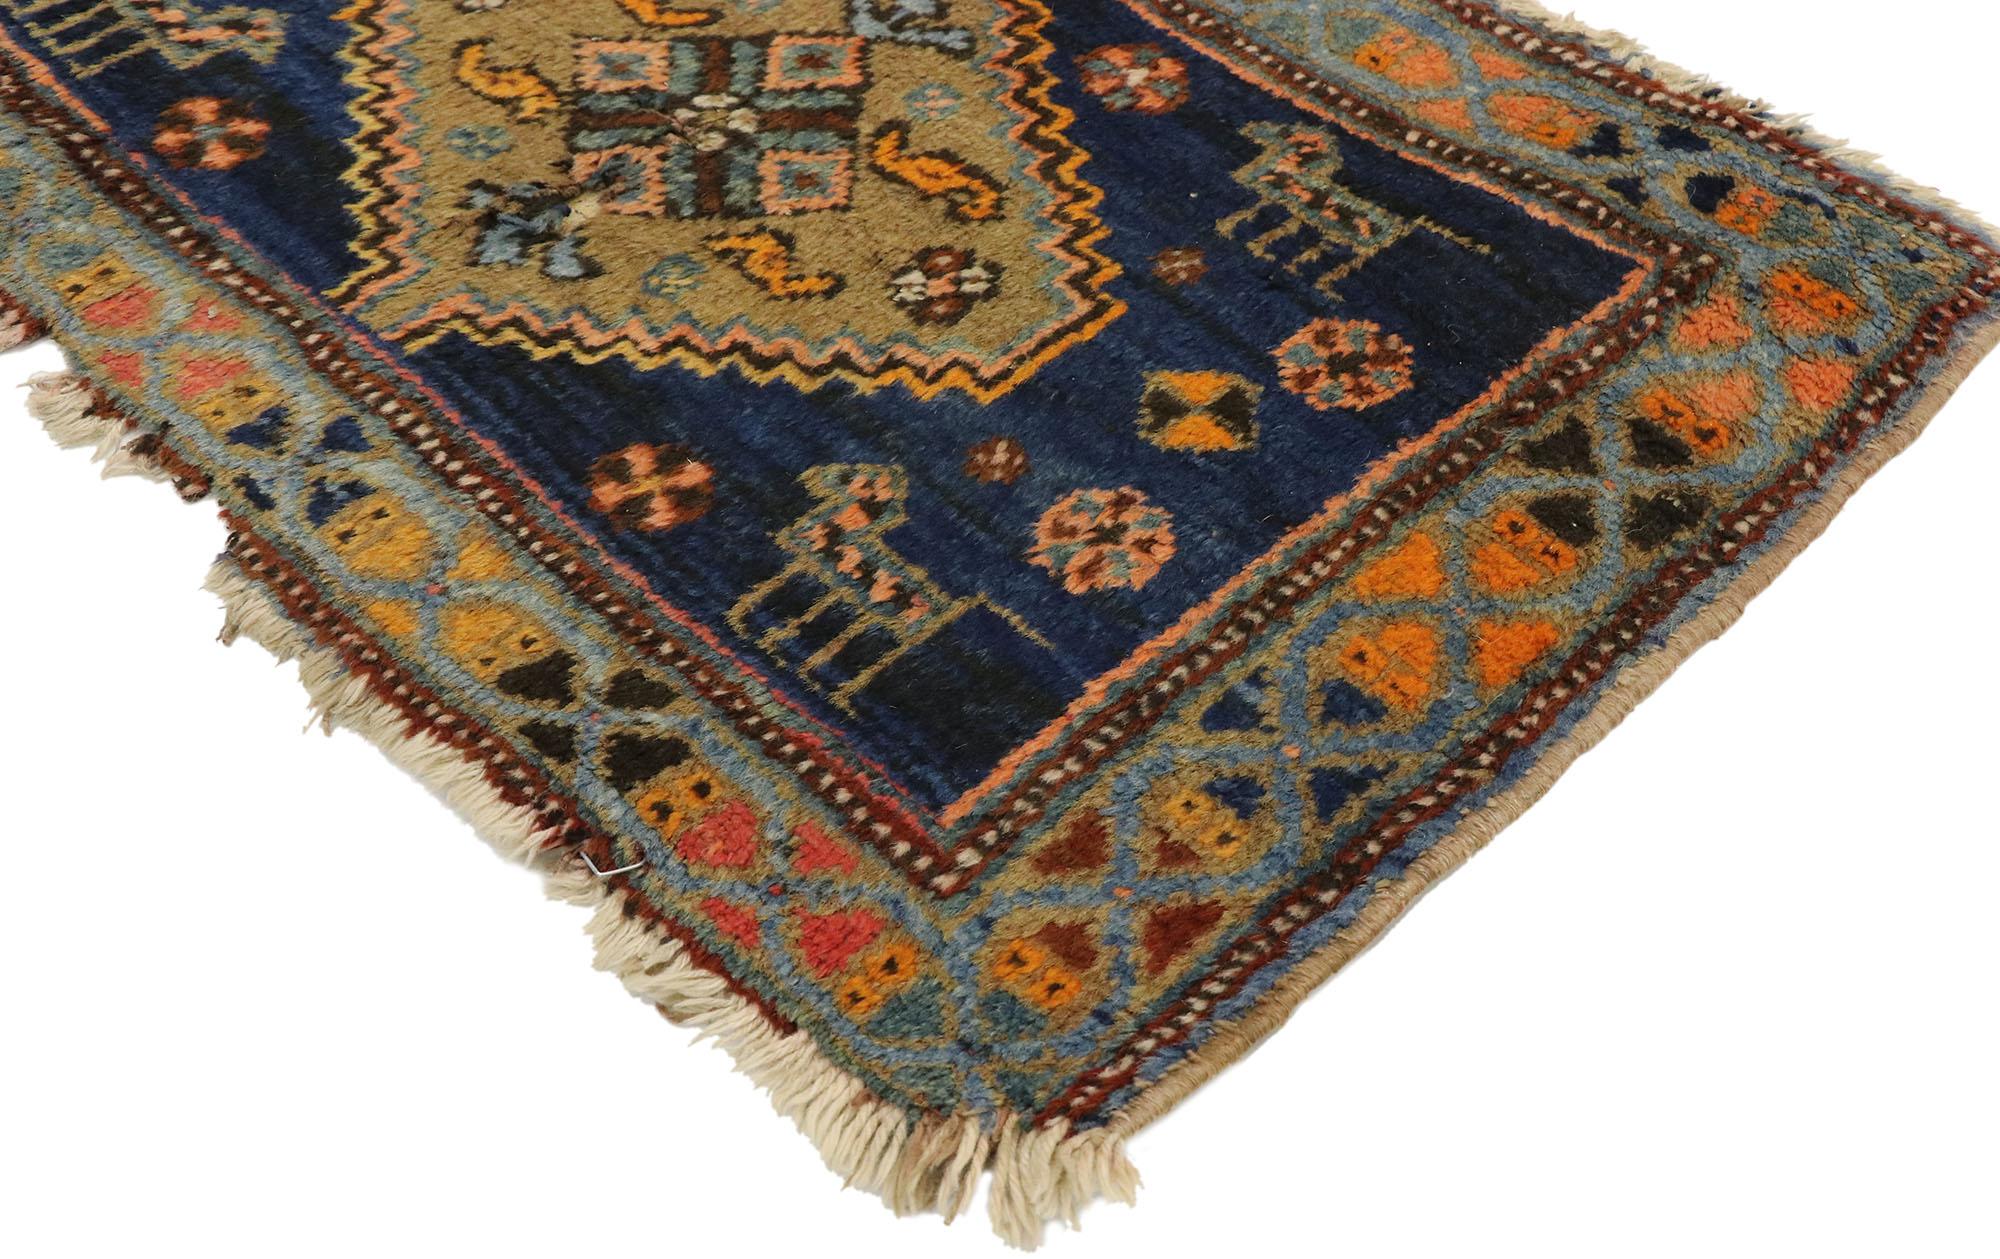 72553 Distressed Antique-Worn Persian Hamadan Rug, 01'08 x 02'08. Embark on a journey where nomadic charm seamlessly intertwines with tribal enchantment in this hand-knotted wool antique-worn Persian Hamadan rug. At its core, a stepped lozenge